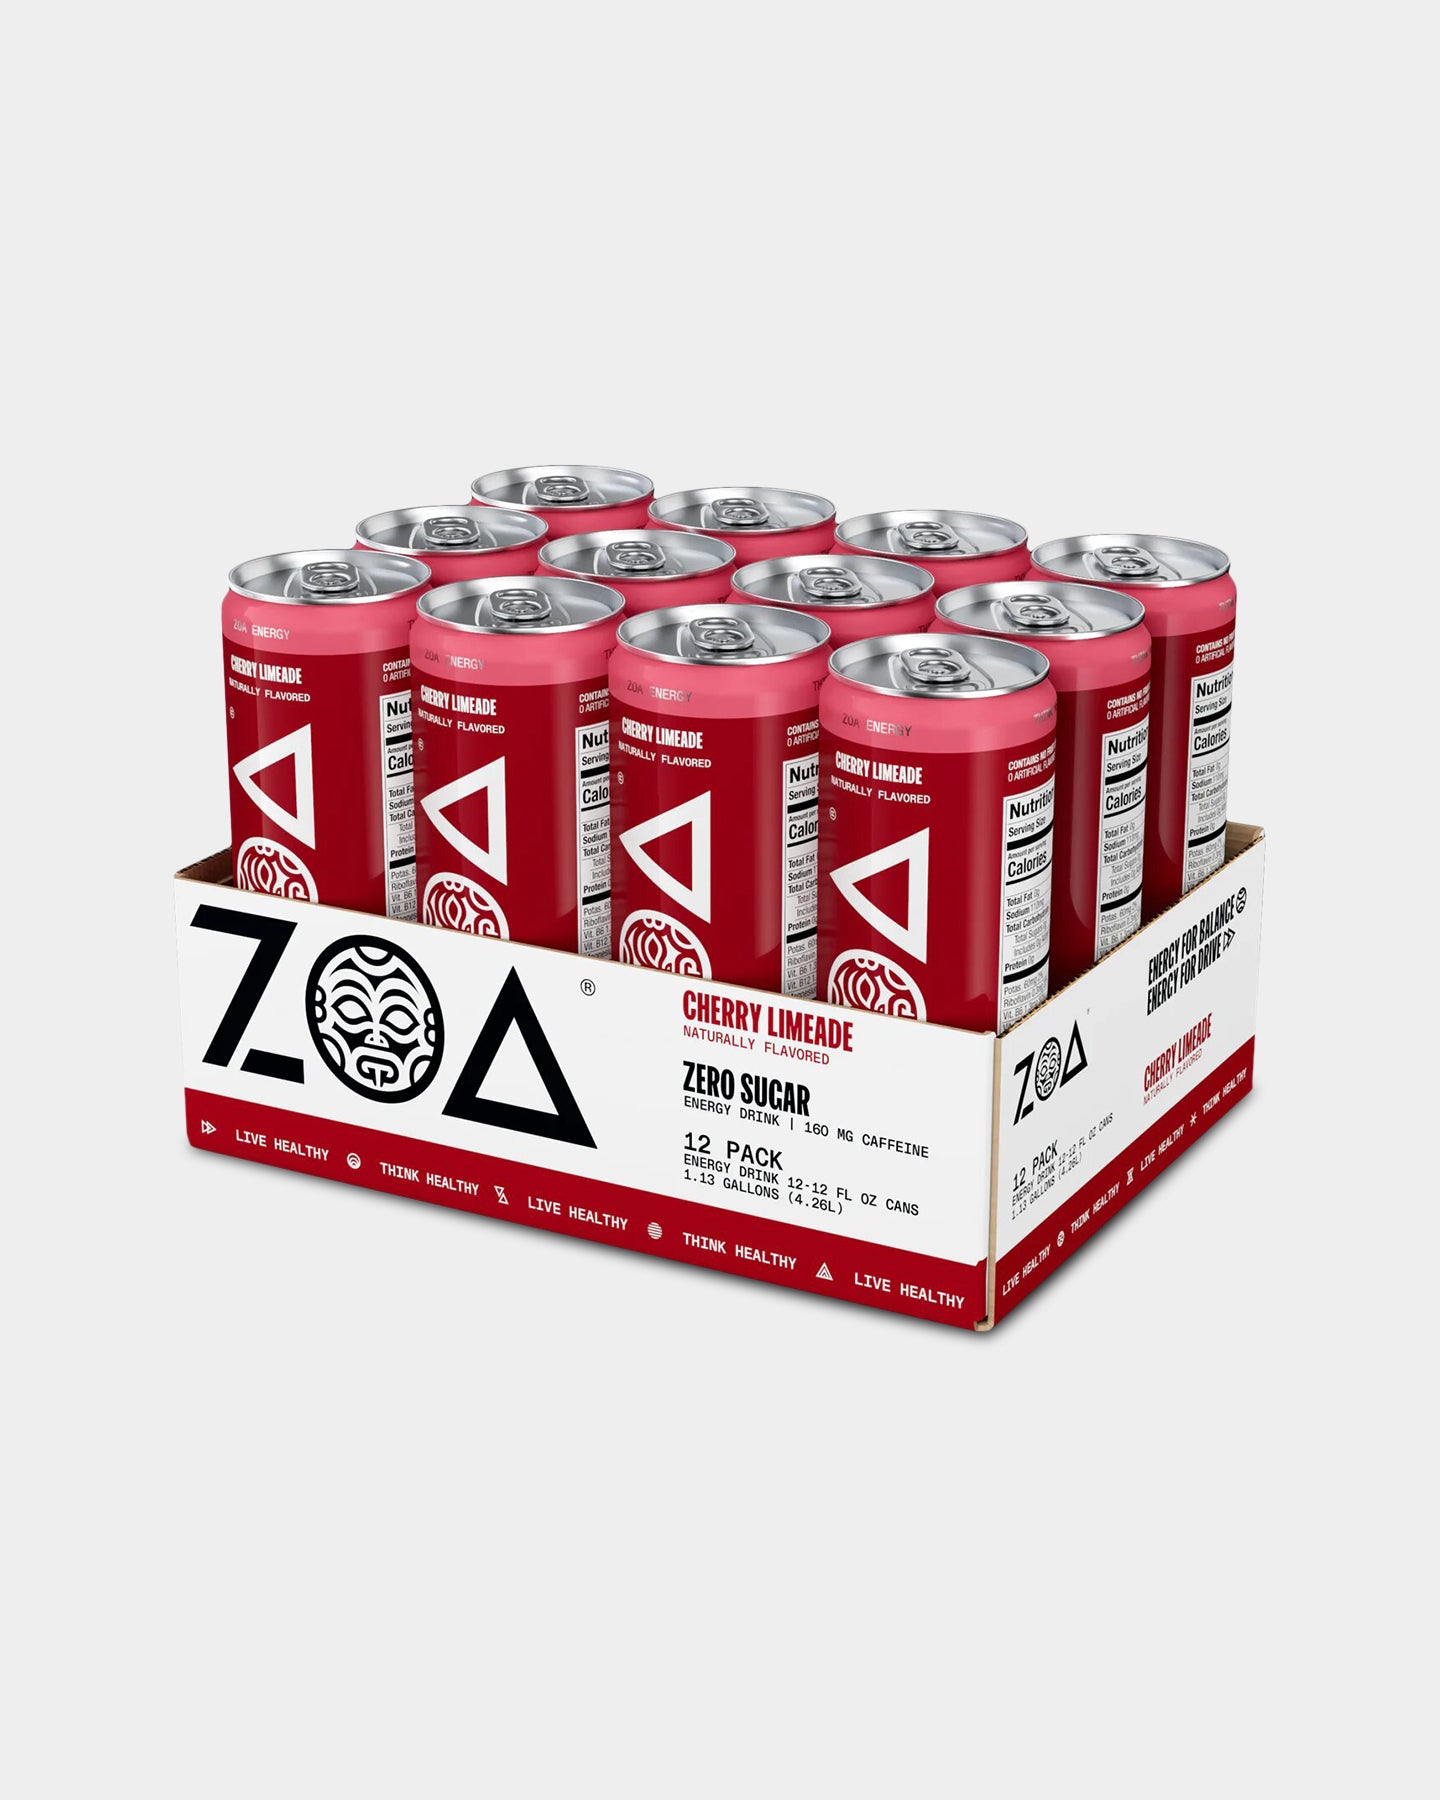 The ZOA Energy Drink Formula - Nutrition & Ingredient Information